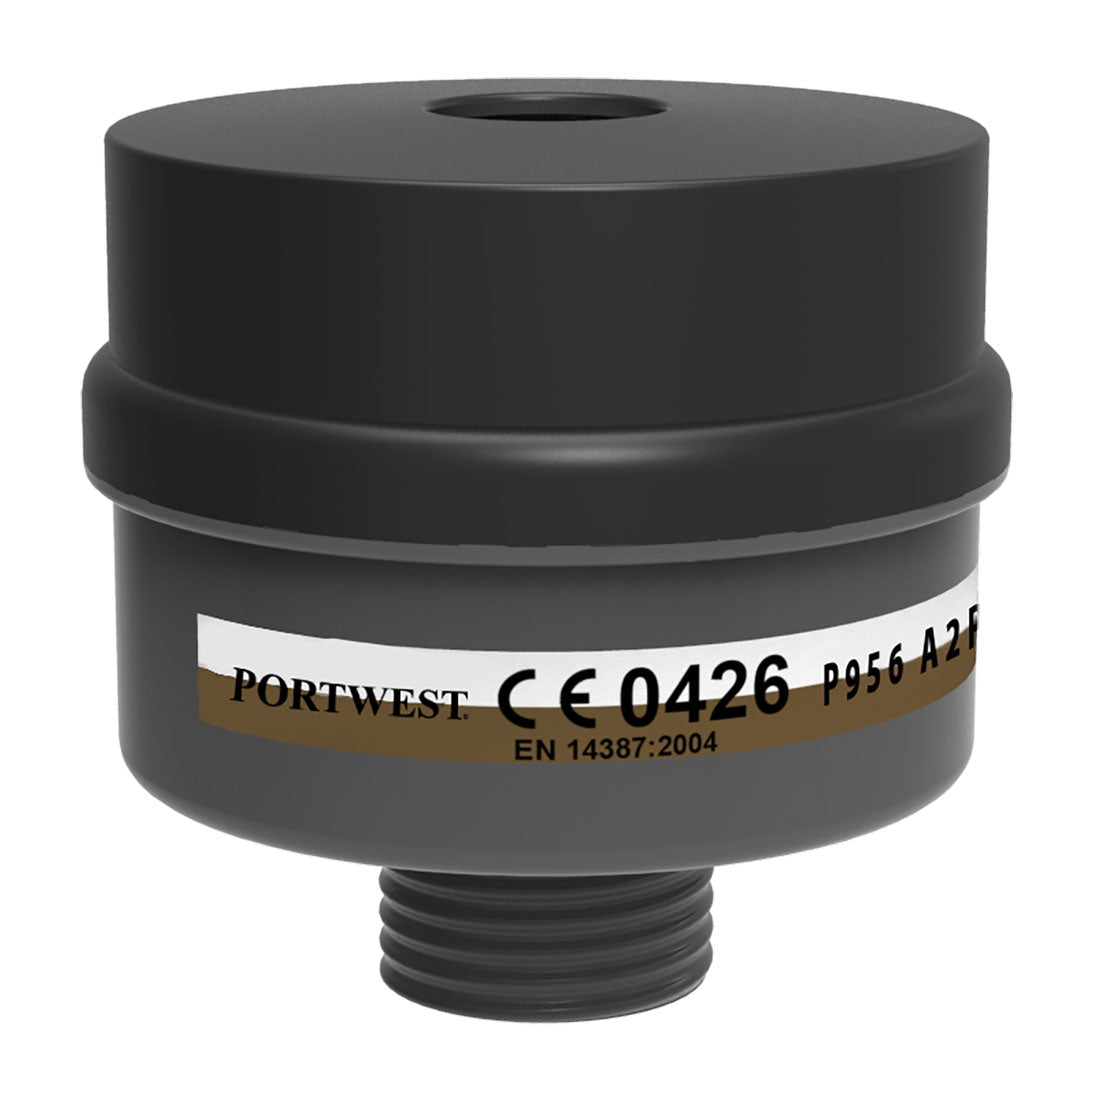 Portwest A2P3 Combination Filter Universal Thread